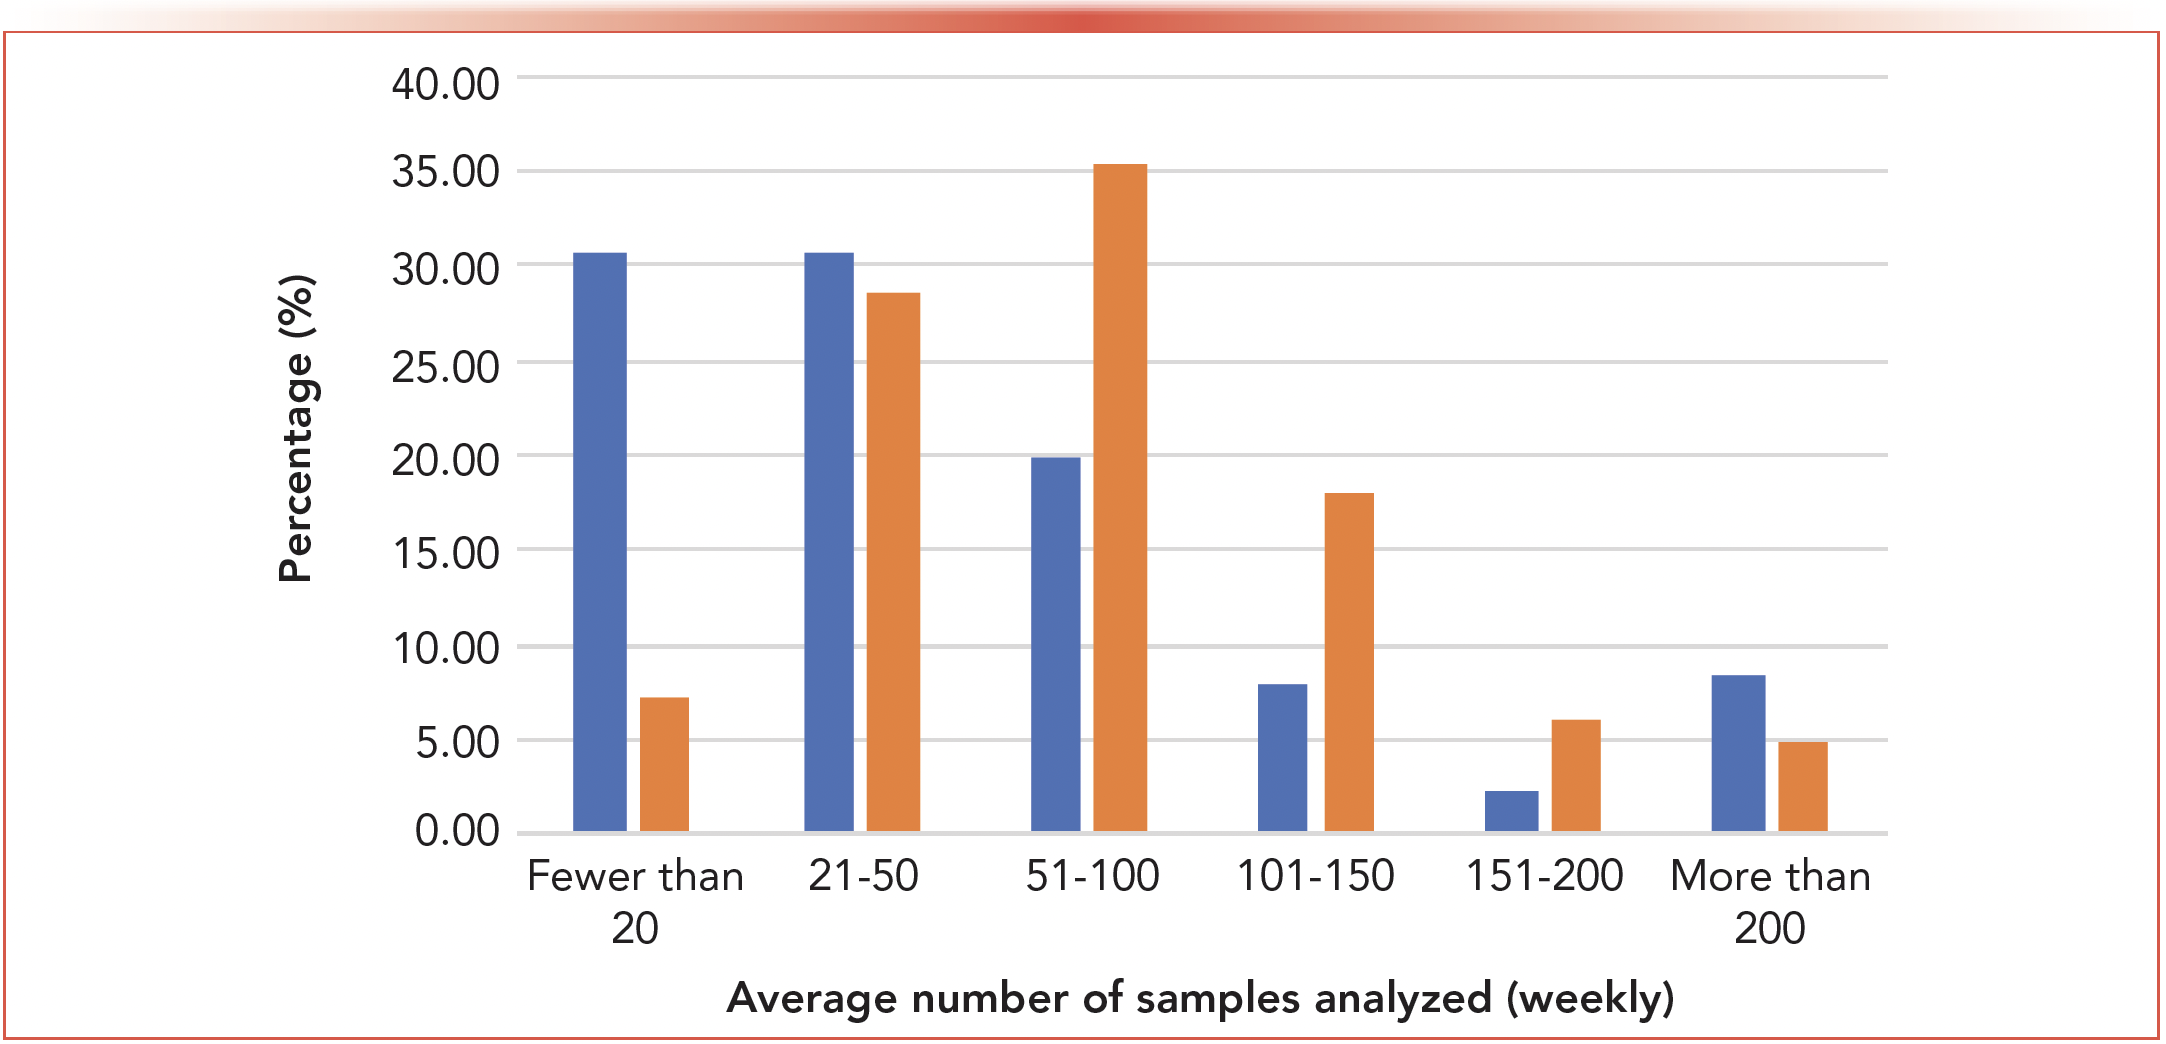 FIGURE 9: Average number of samples analyzed weekly per analytical instrument in 2013 (blue) and 2023 (red) as a percentage of total respondents.